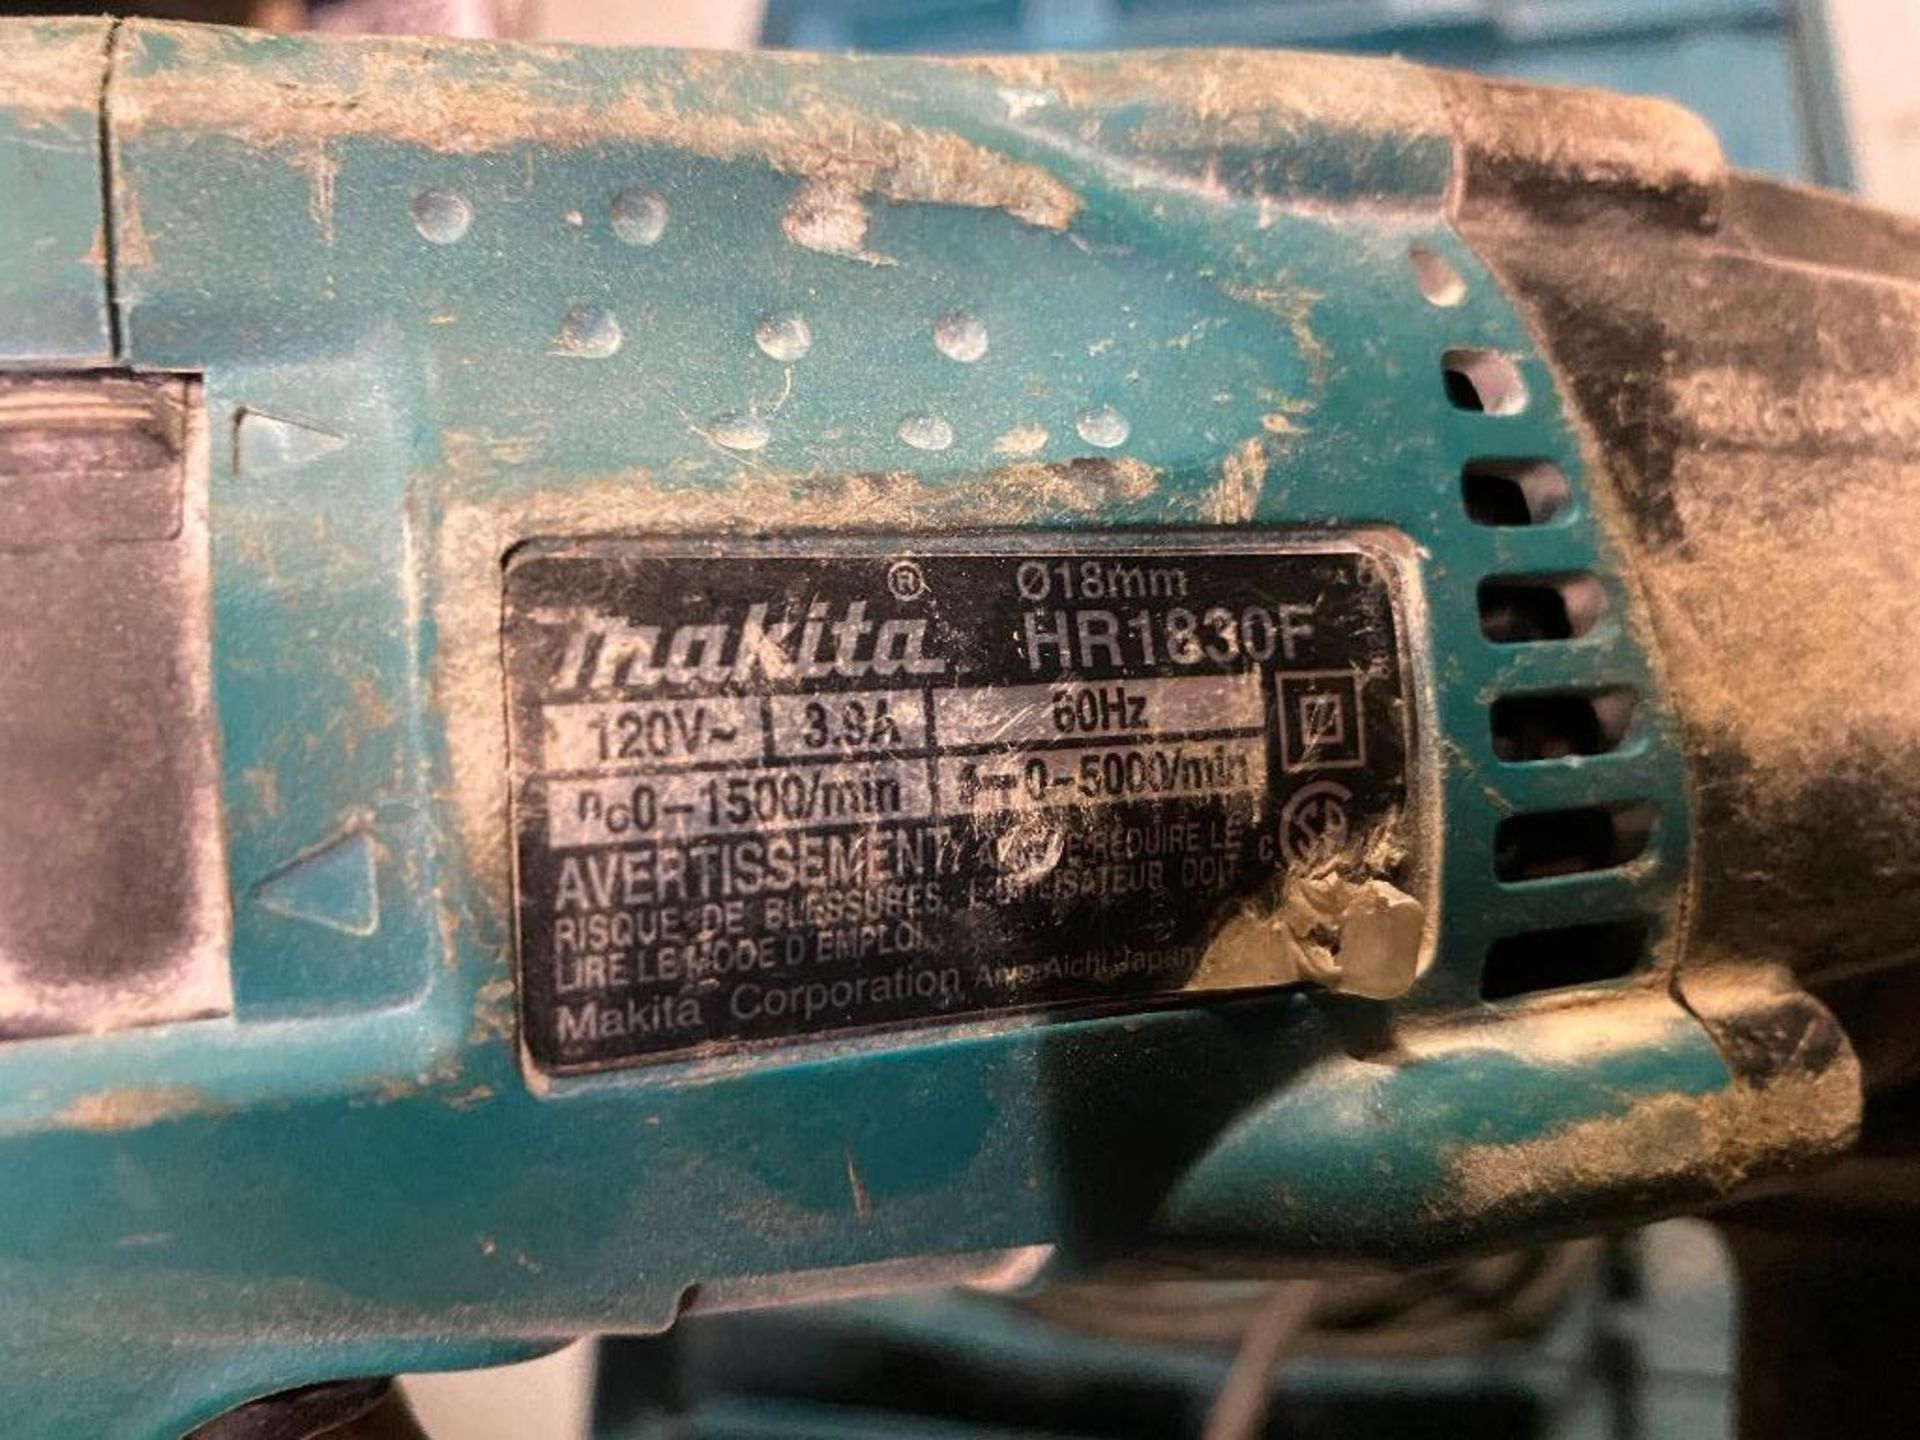 Makita HR1830F Electric Hammer Drill - Image 3 of 3